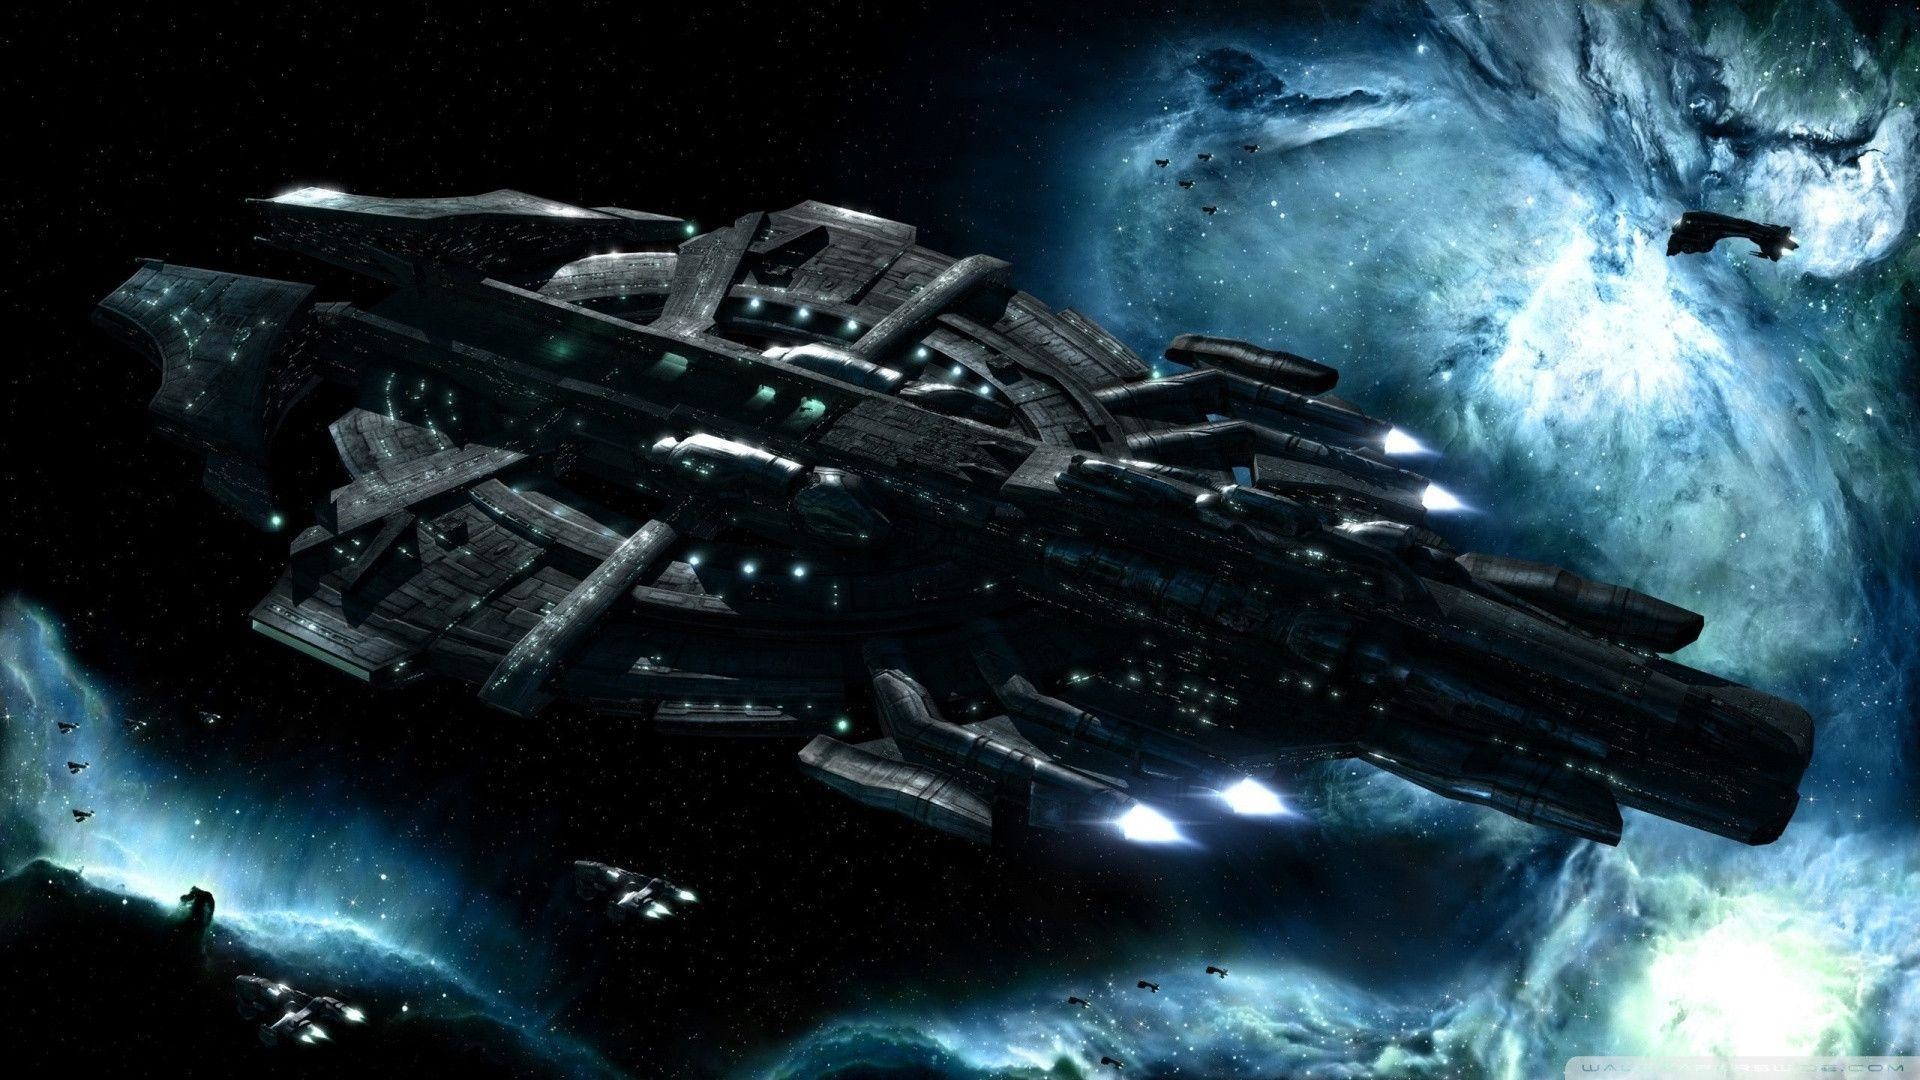 1920x1080 Spaceship Wallpaper 1920X1080 Hd Images 3 HD Wallpapers | aduphoto.